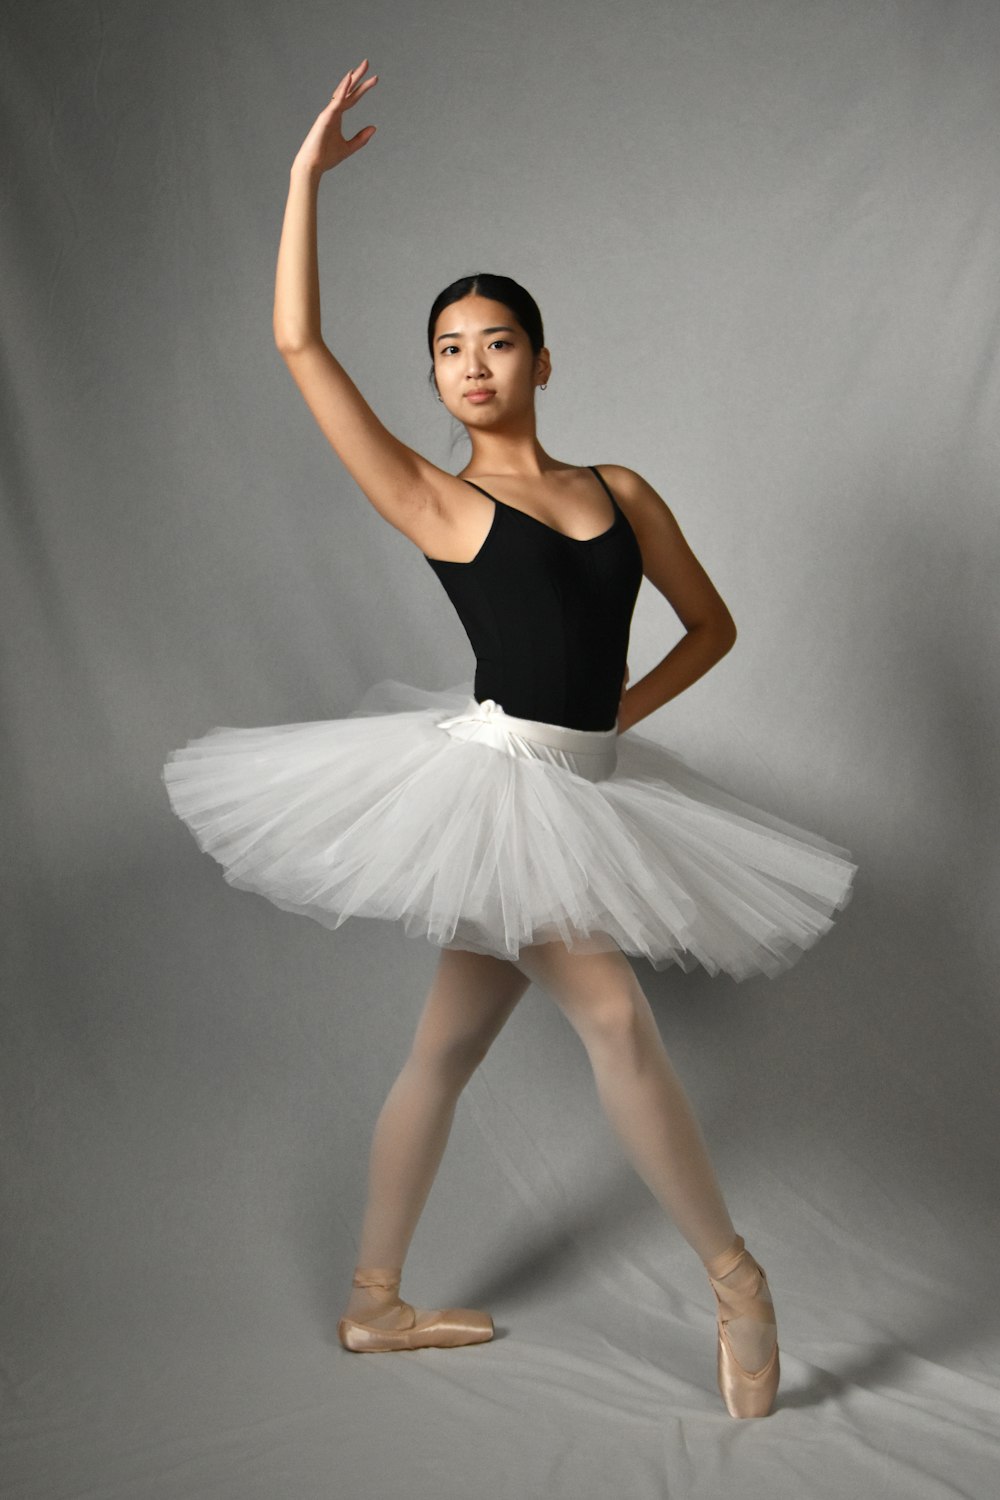 a woman in a black top and white tutu